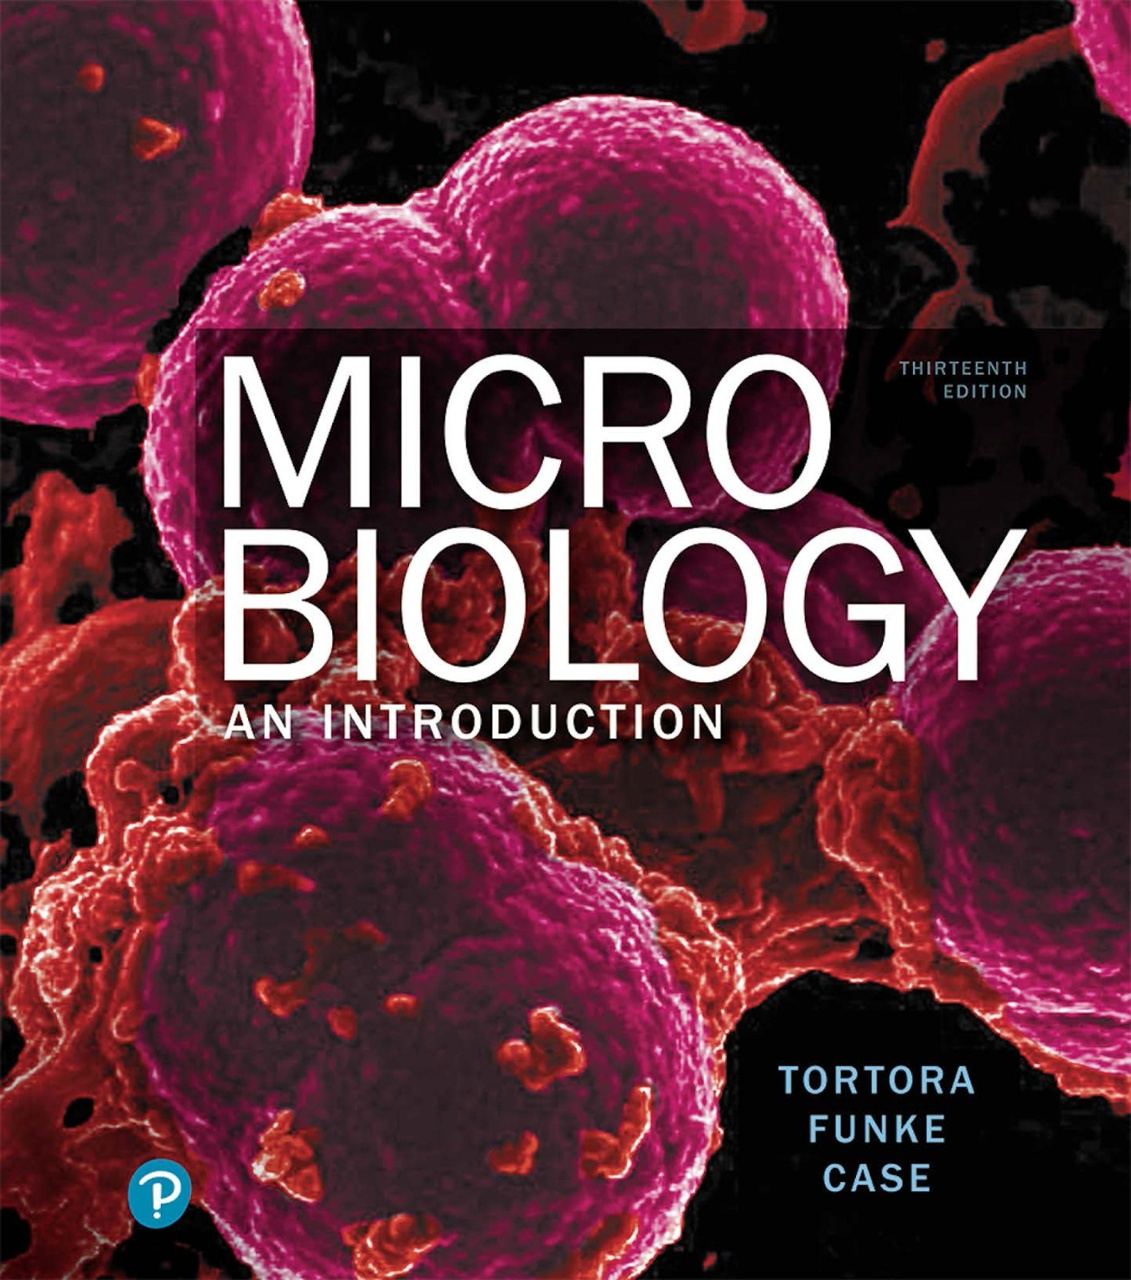 Microbiology: An Introduction by Tortora, Funke, and Case